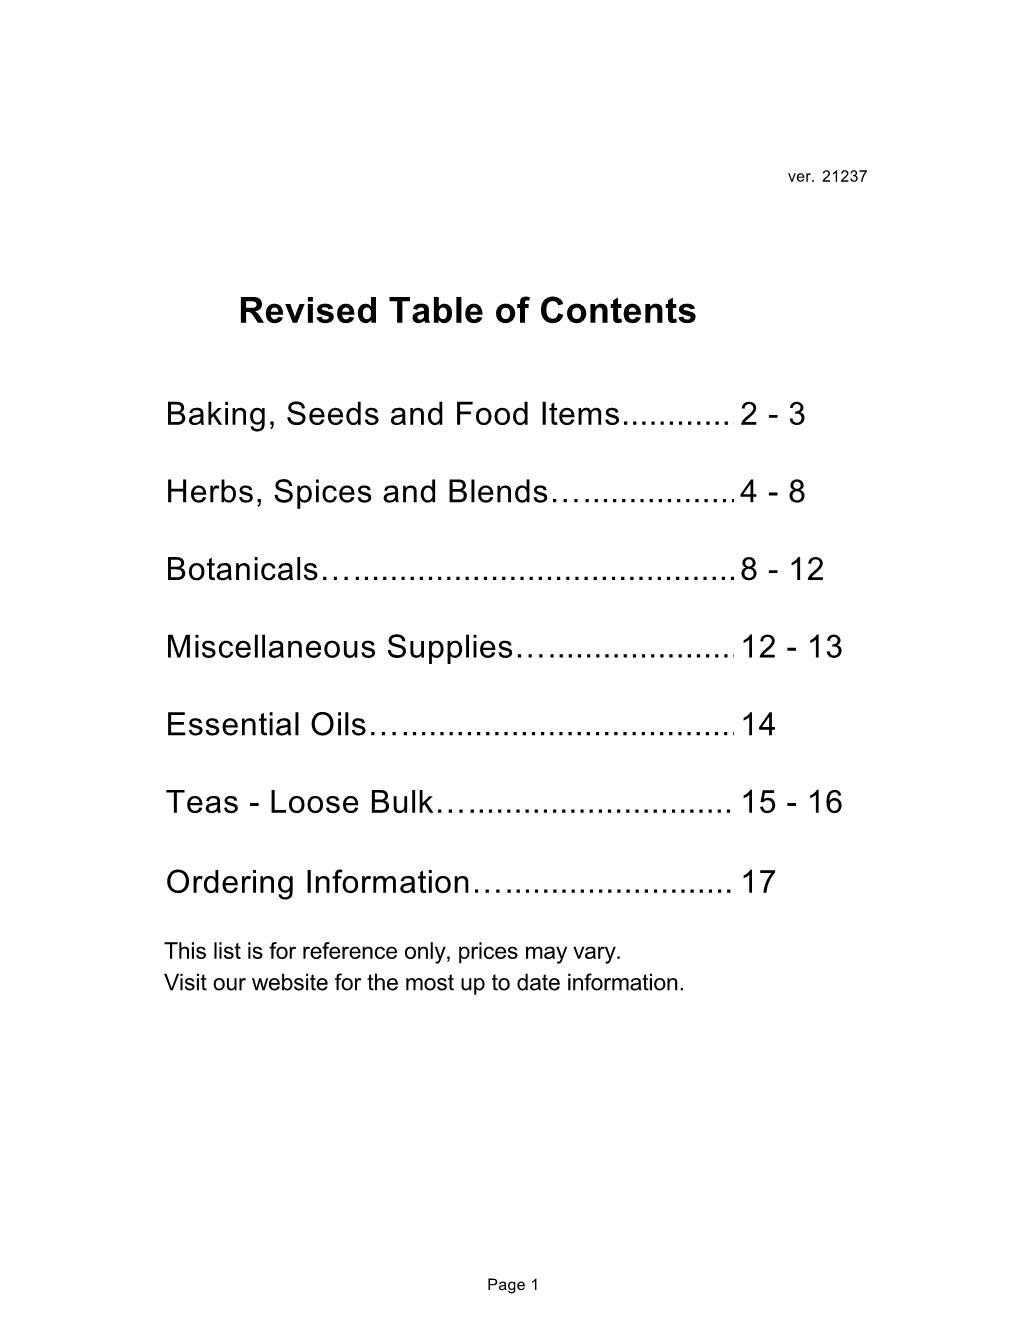 Revised Table of Contents